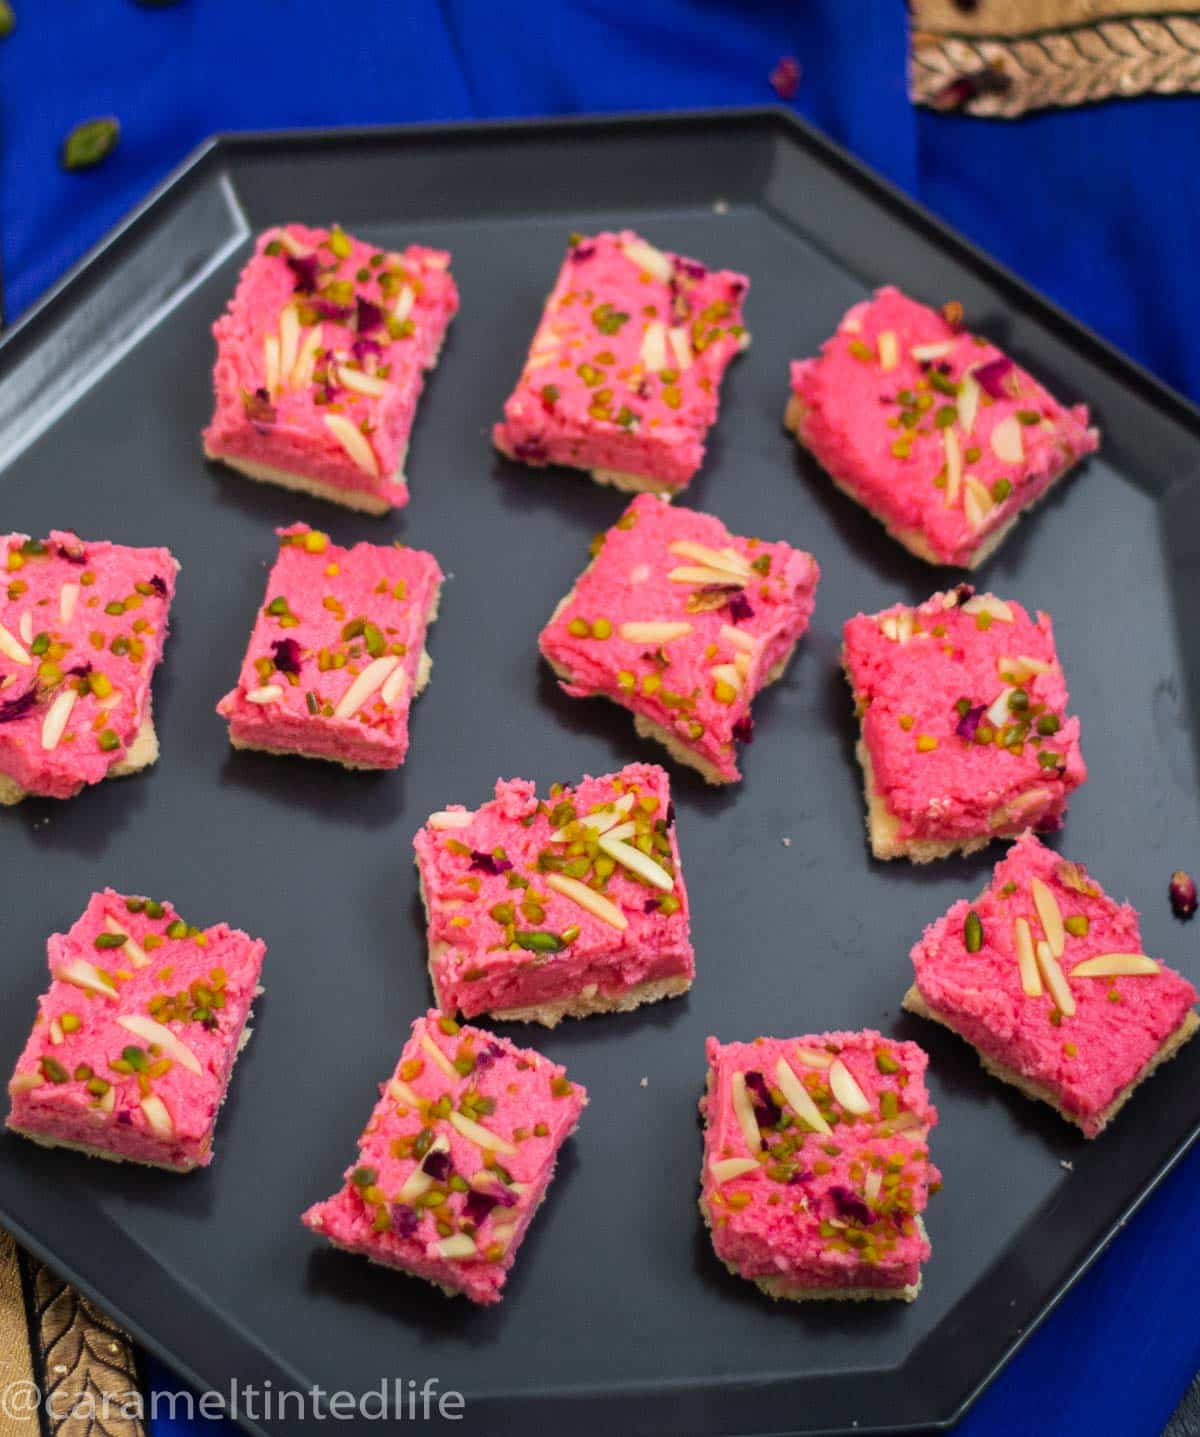 Squares slices of rose kalakand on a black tray